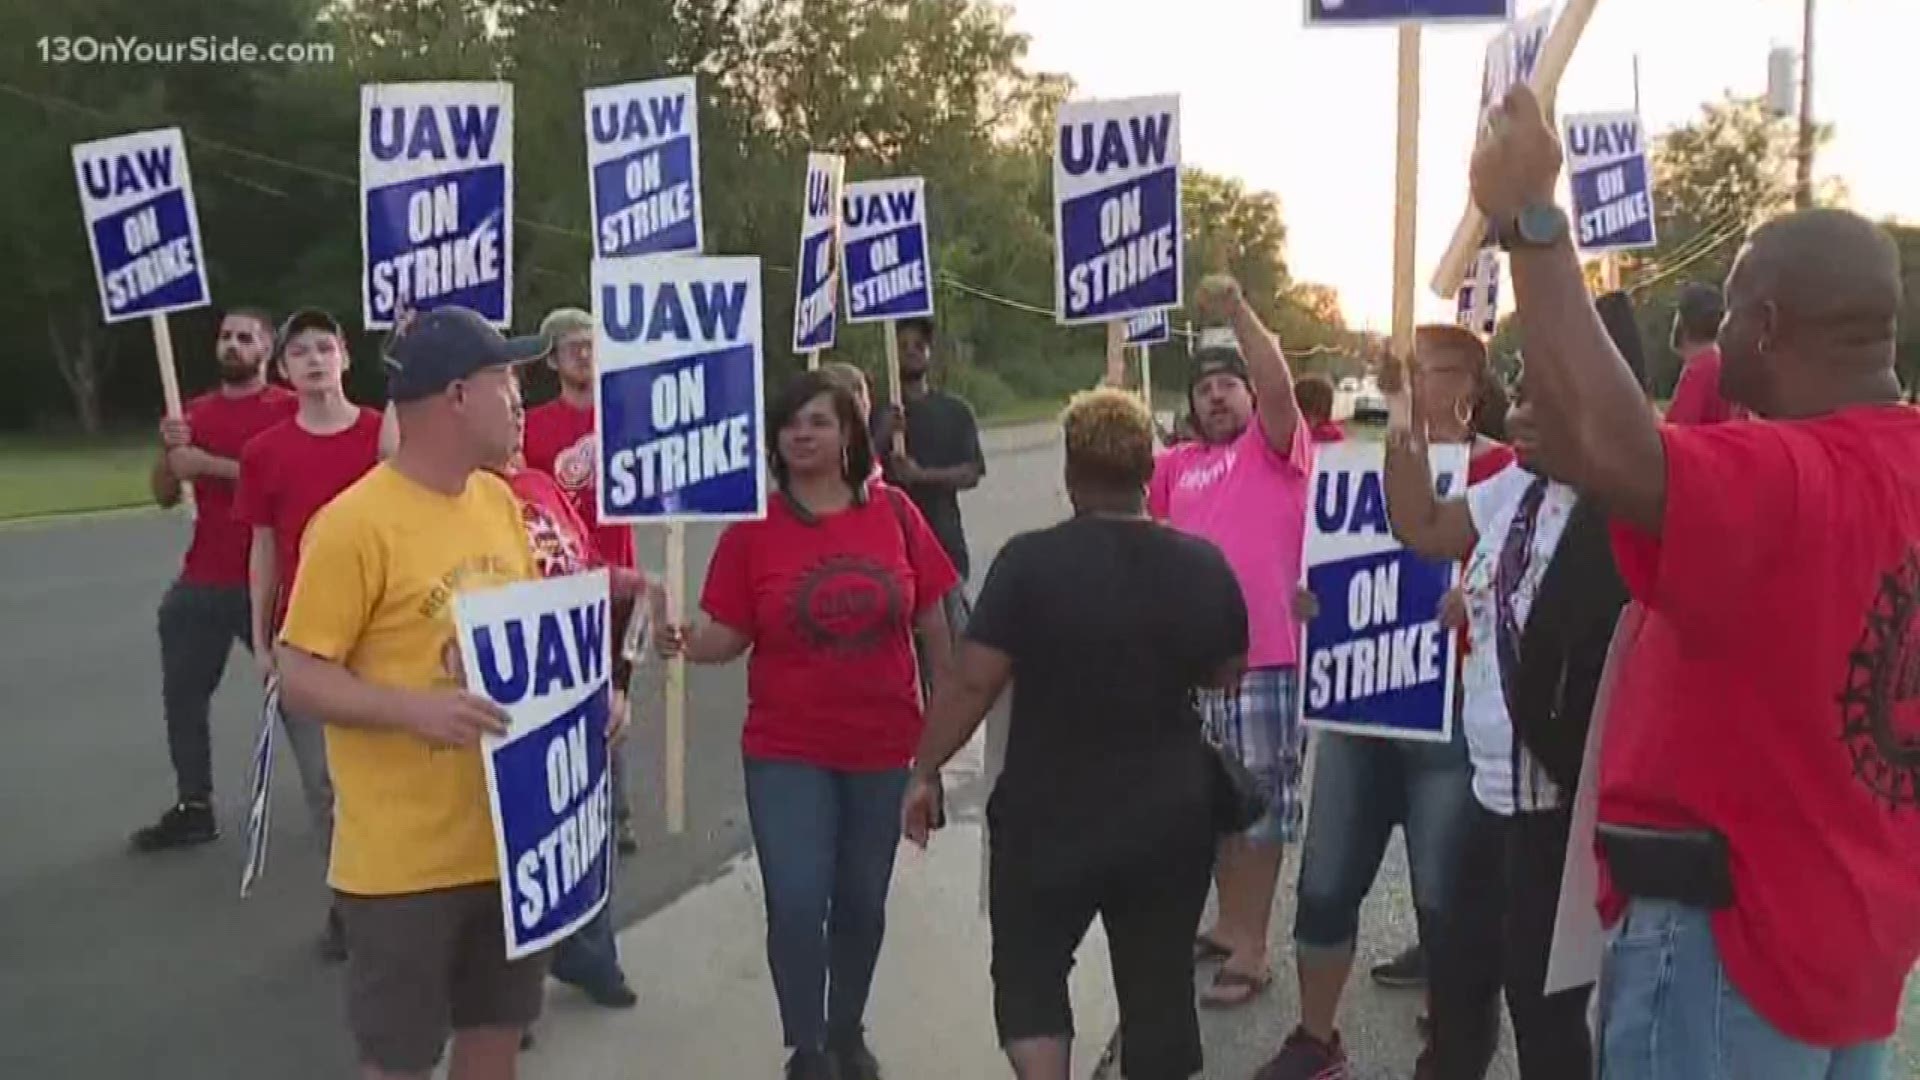 Thousands of auto factories nationwide are at a standstill as the UAW strike moves into its second day. Both sides have agreed on about 2% of the contract language, leaving 98% left to negotiate.